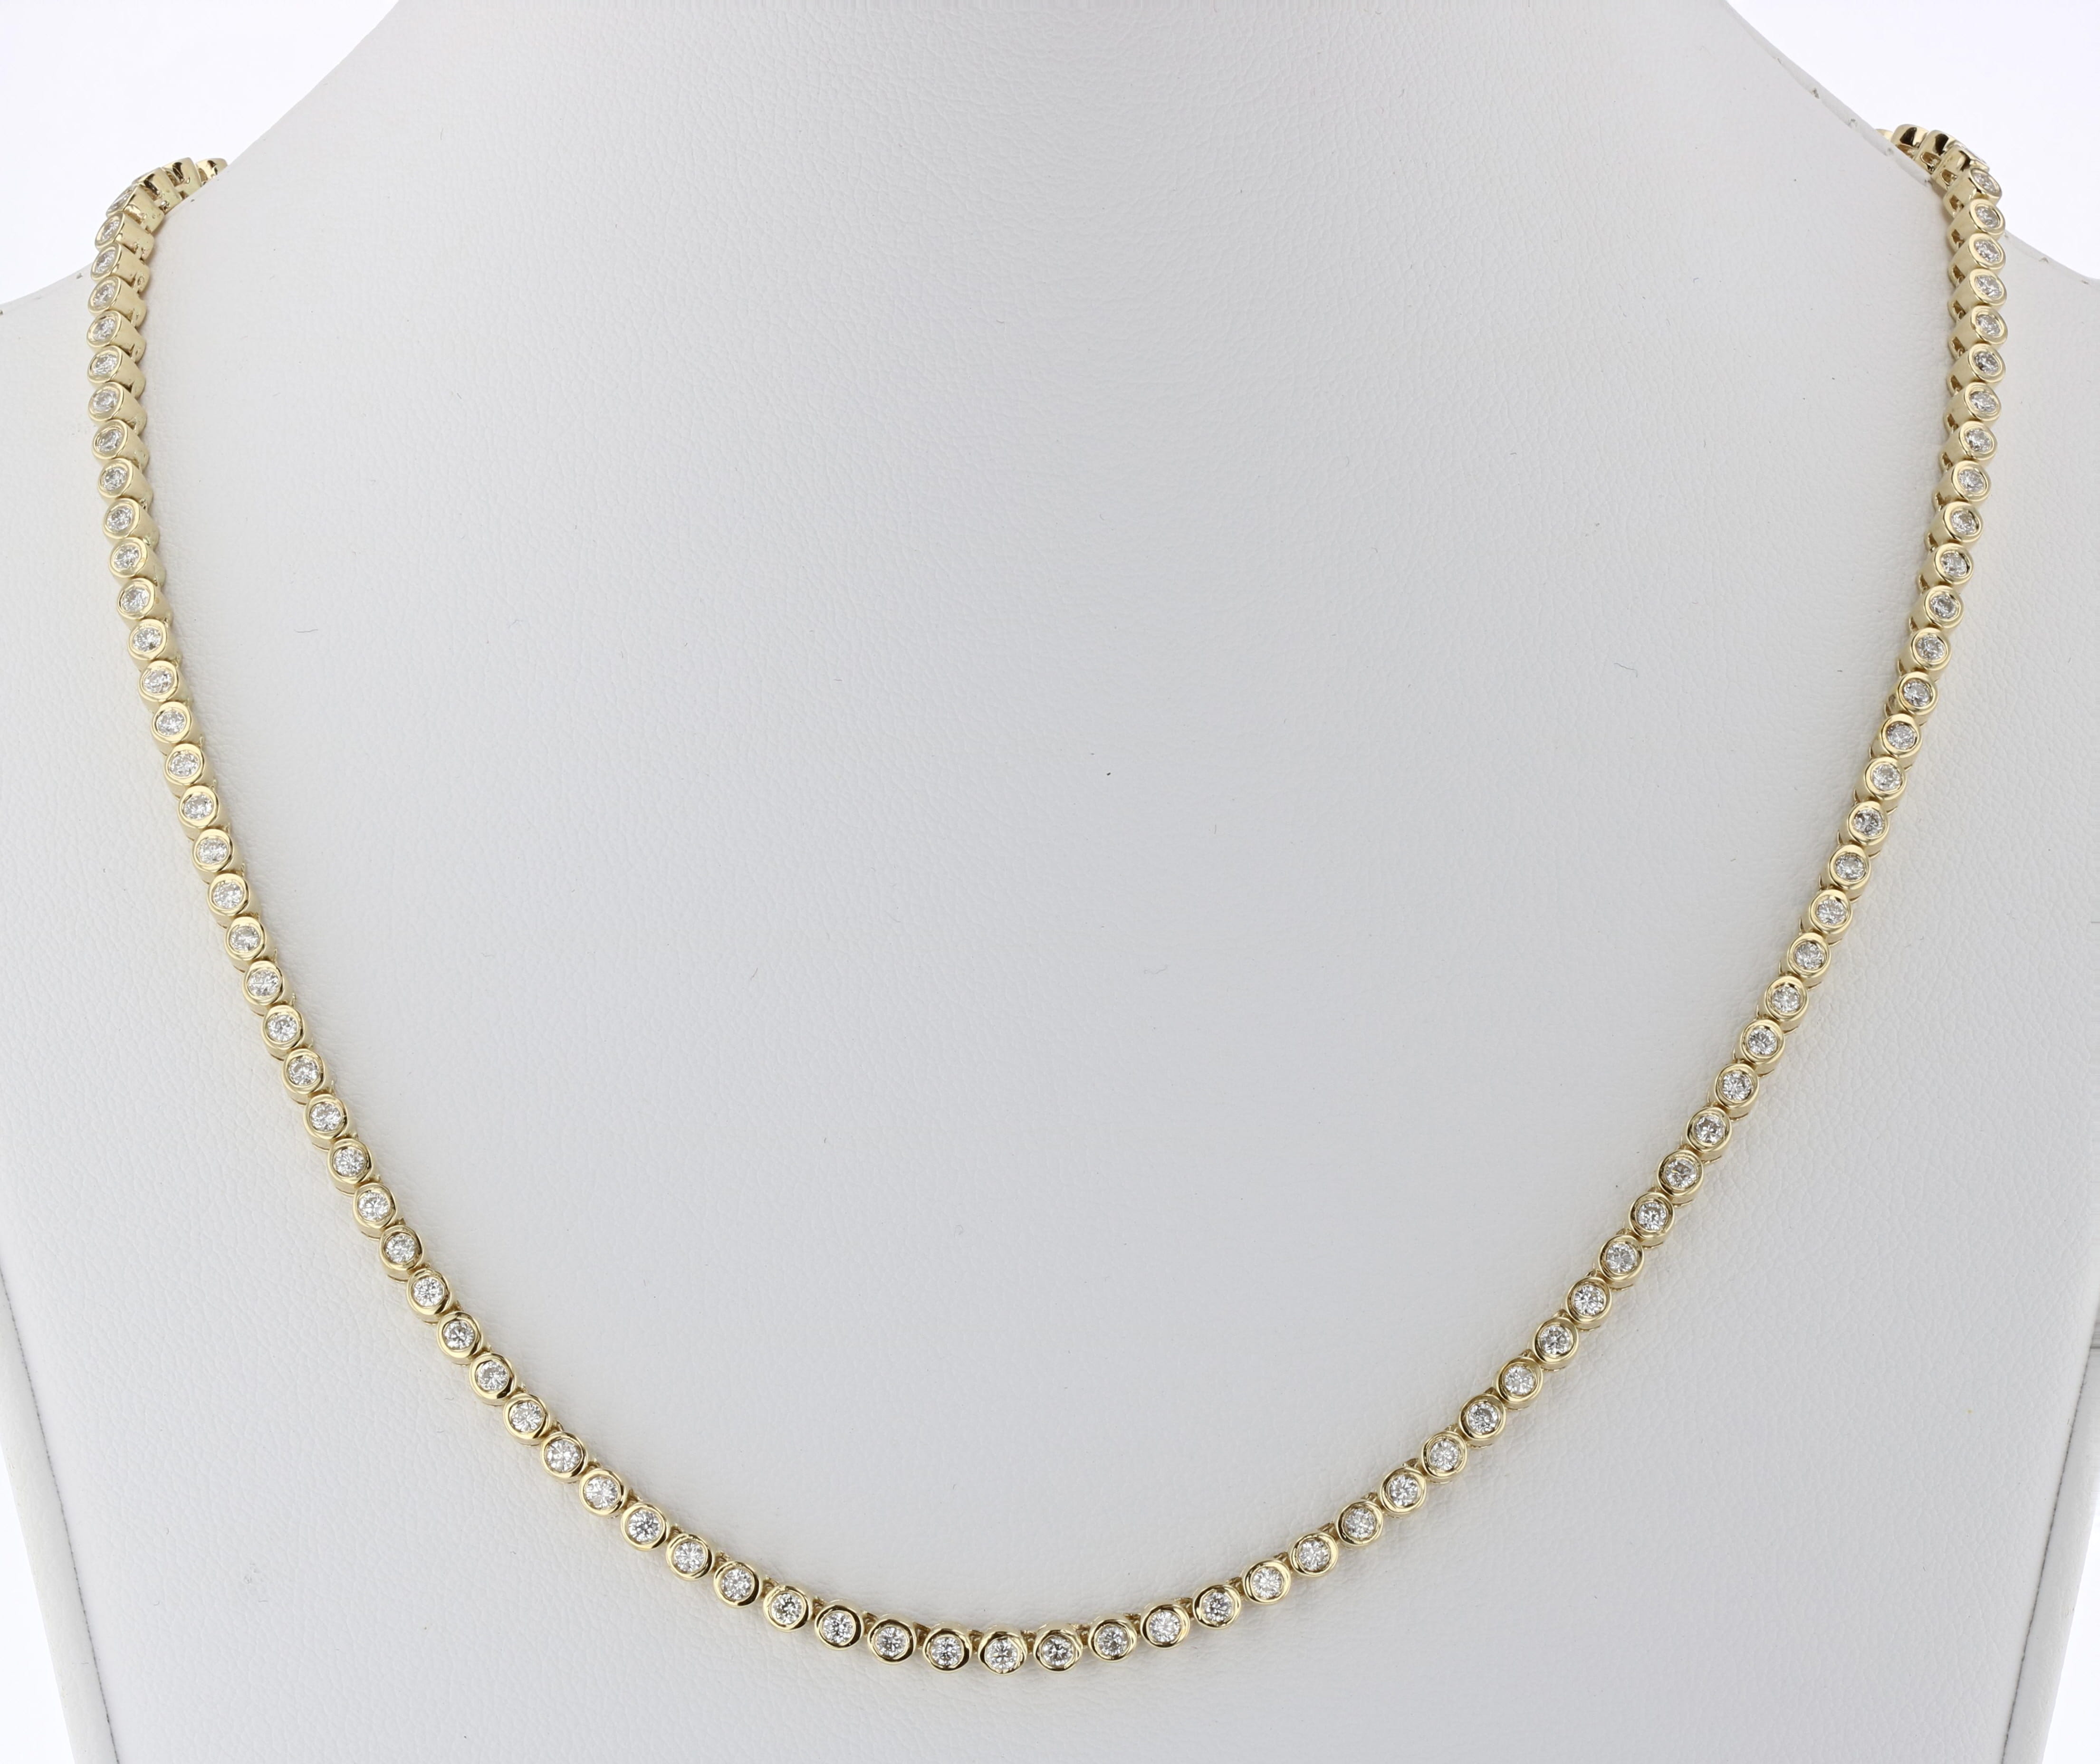 View 3.63ctw Diamond Bezel Tennis Necklace in 14k Yellow Gold - 17 Inch